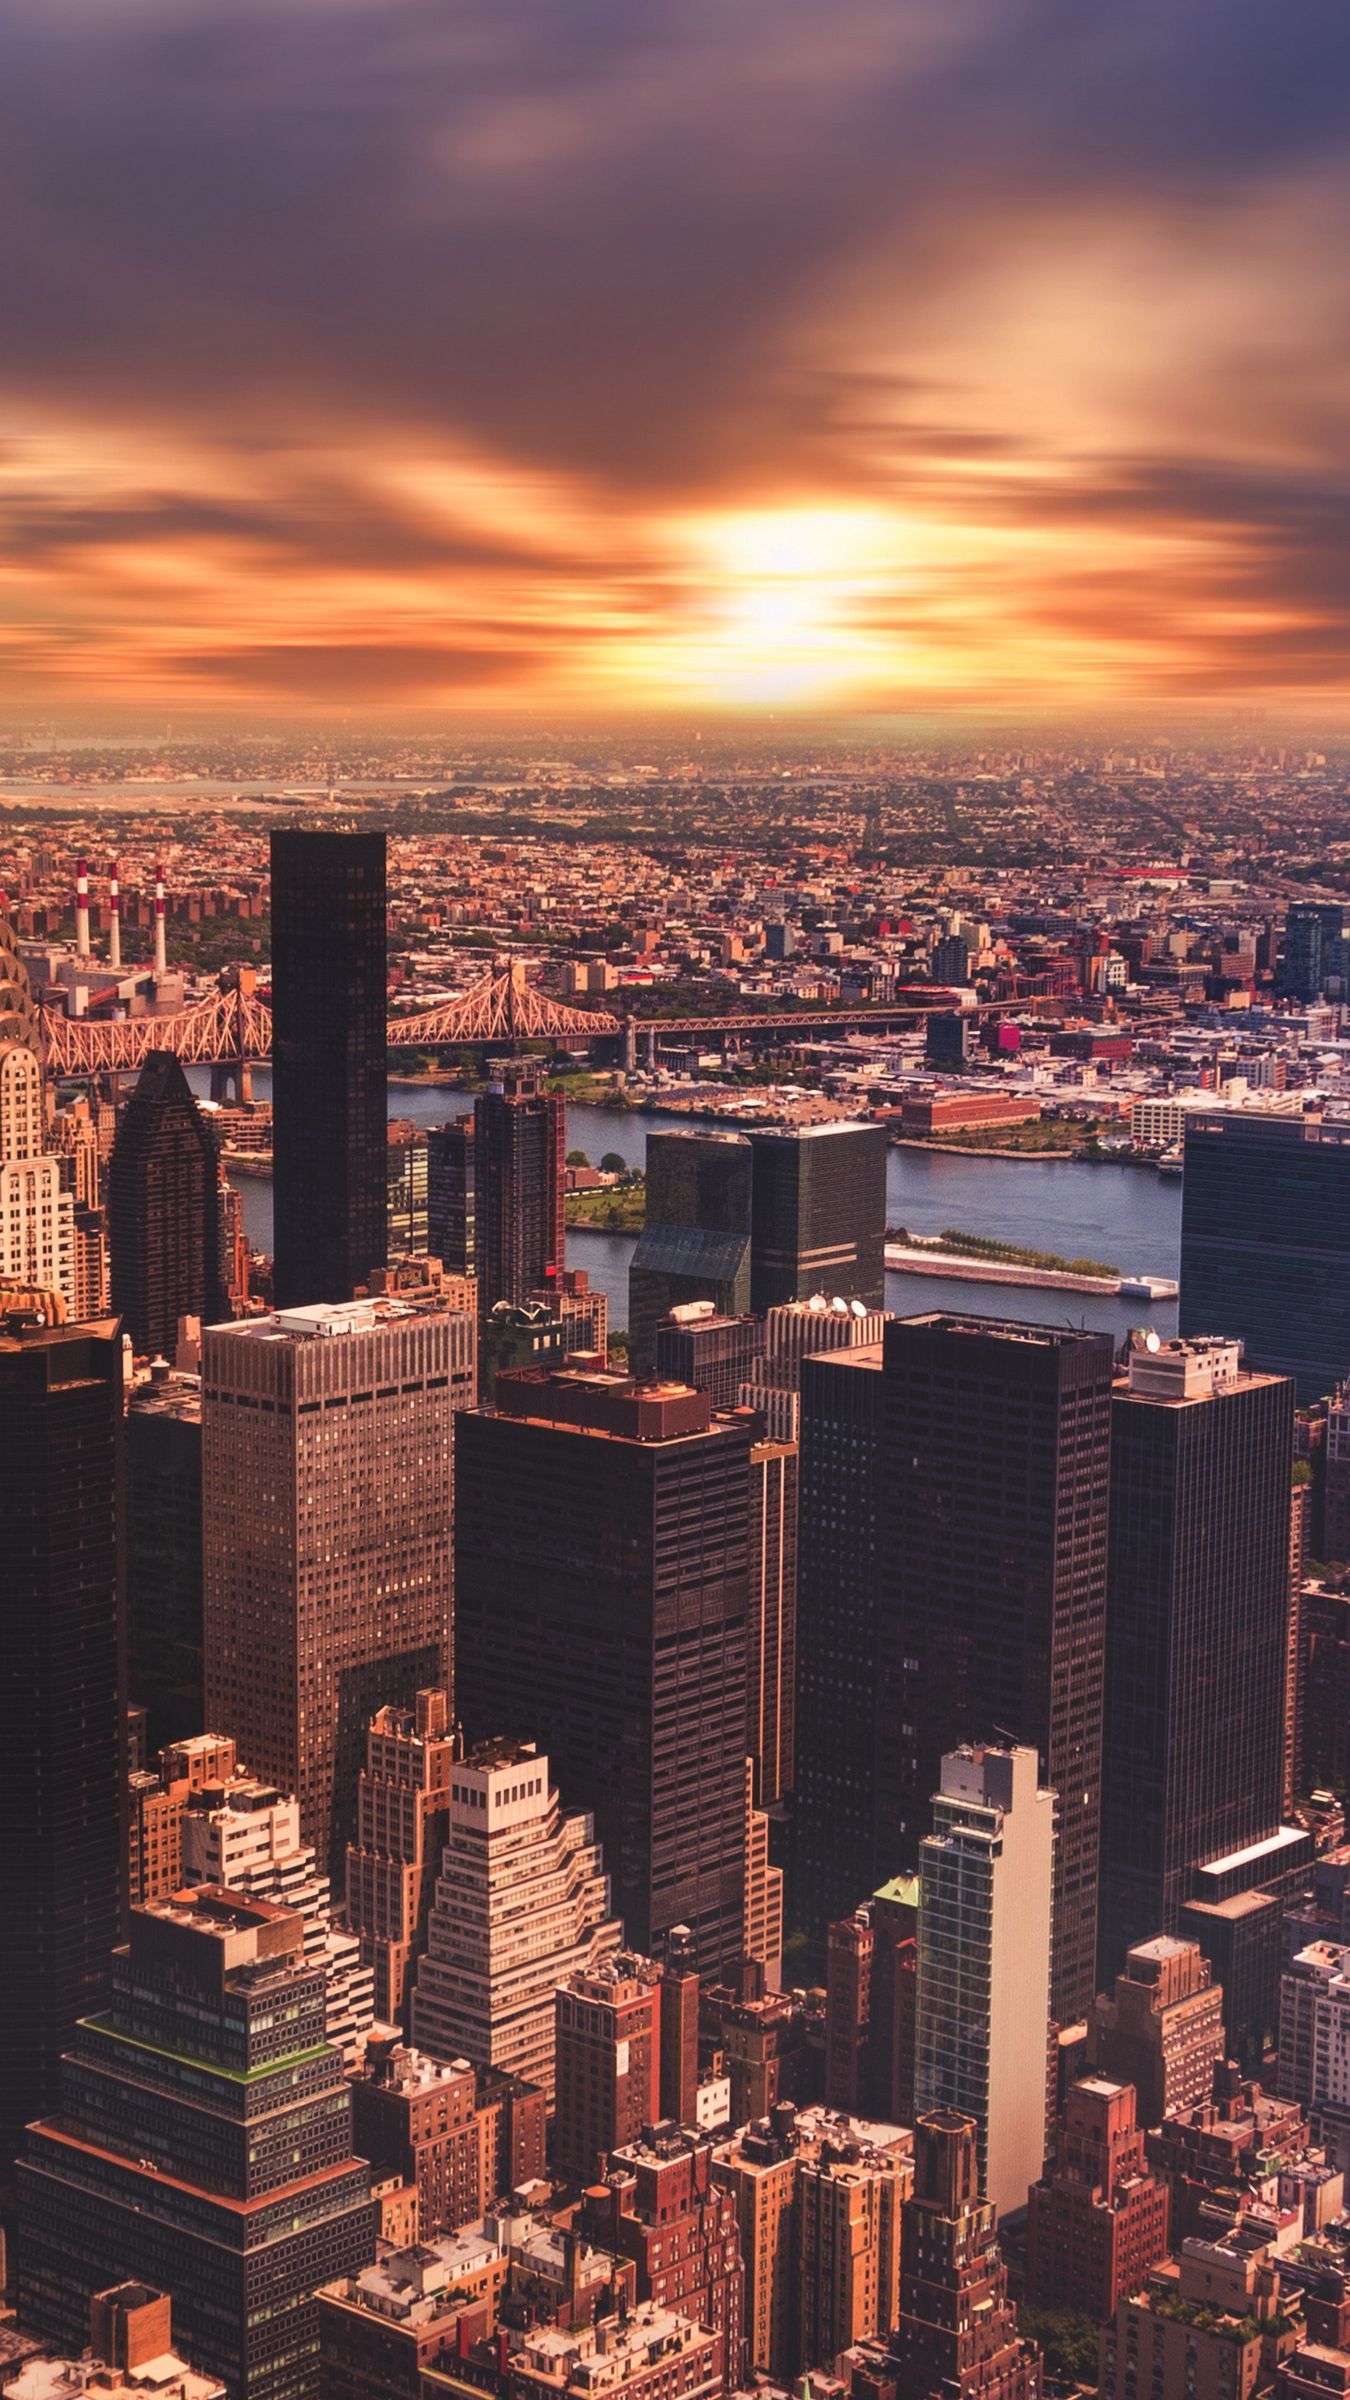 IPhone wallpaper of a cityscape with a sunset in the background - New York